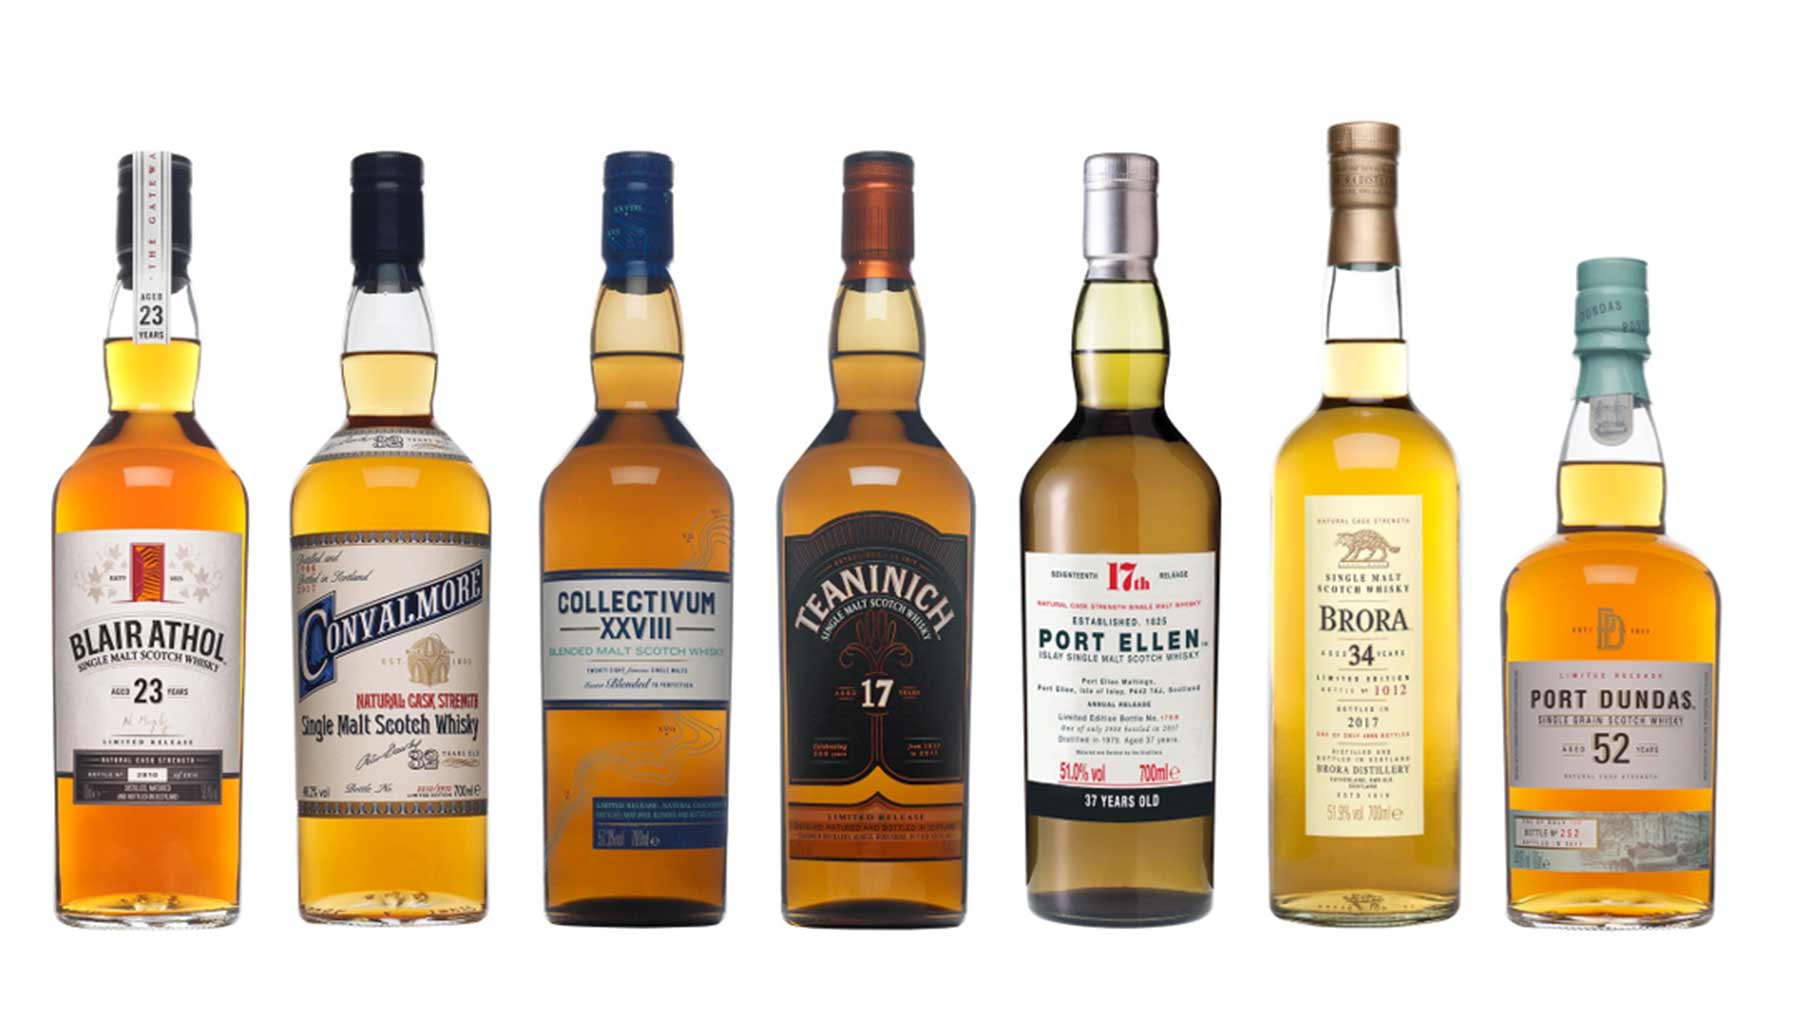 Diageo Special Releases collection